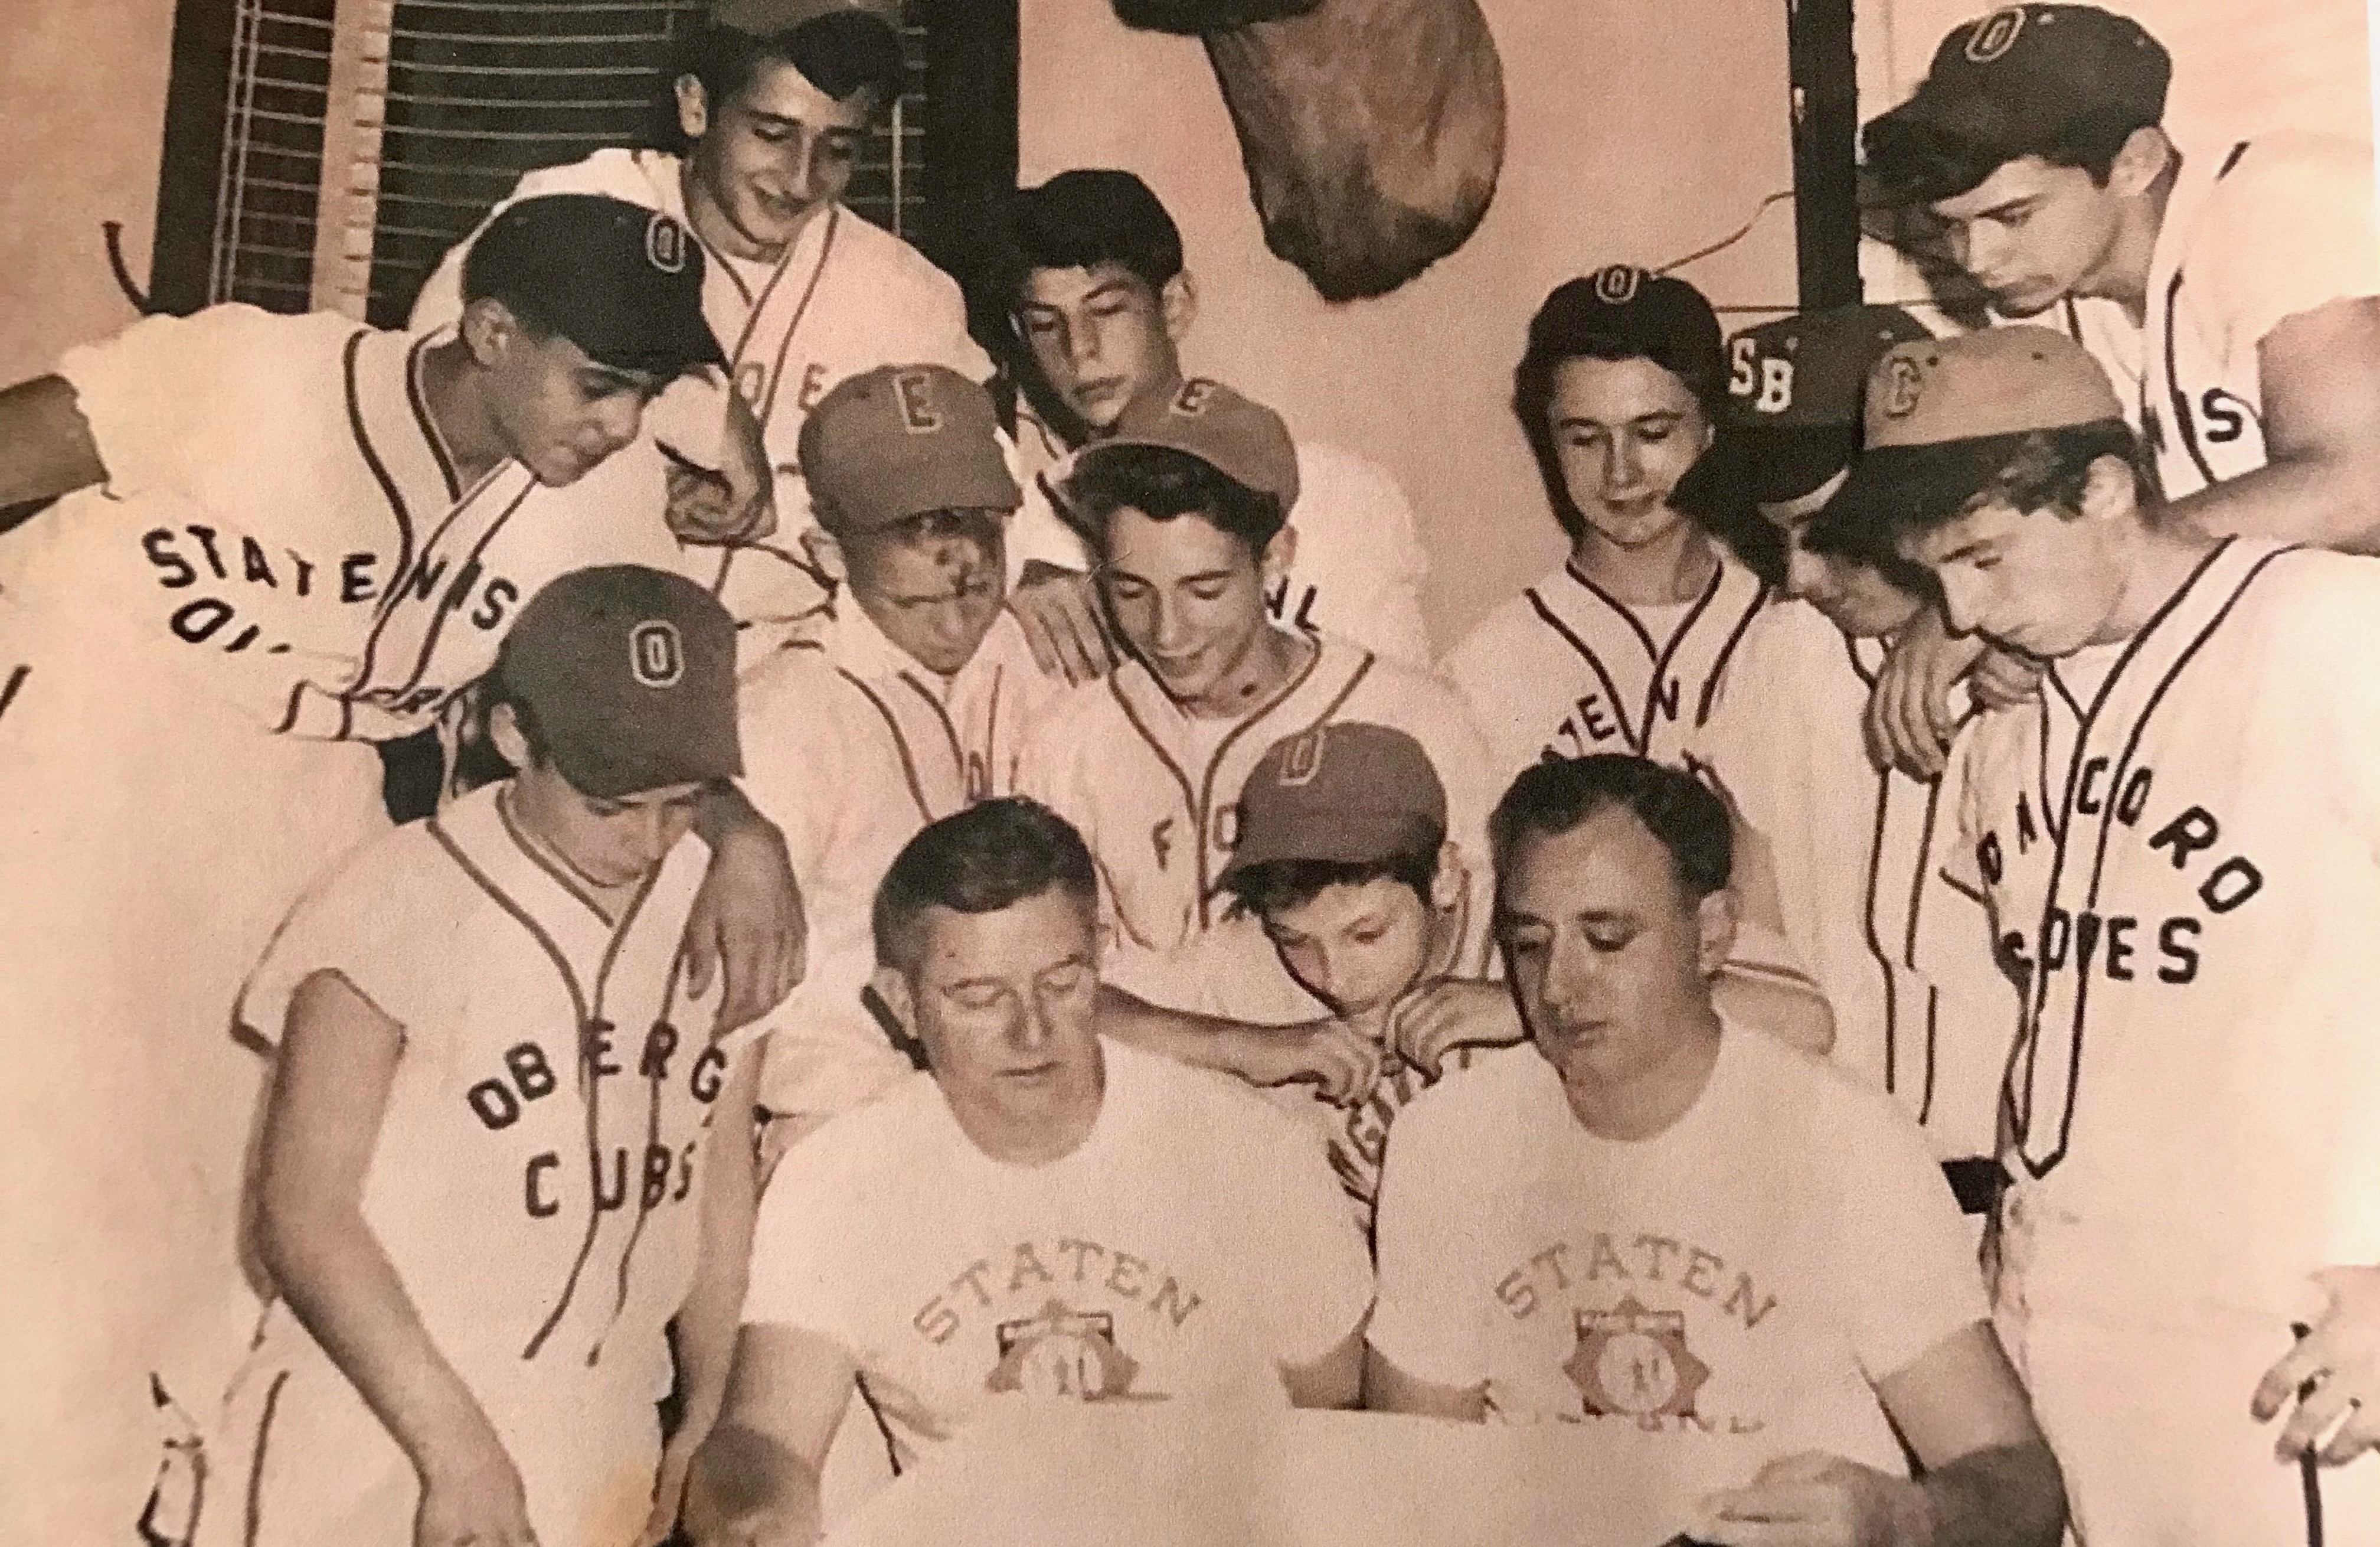 A Look Back This is how Babe Ruth League baseball found a home on Staten Island